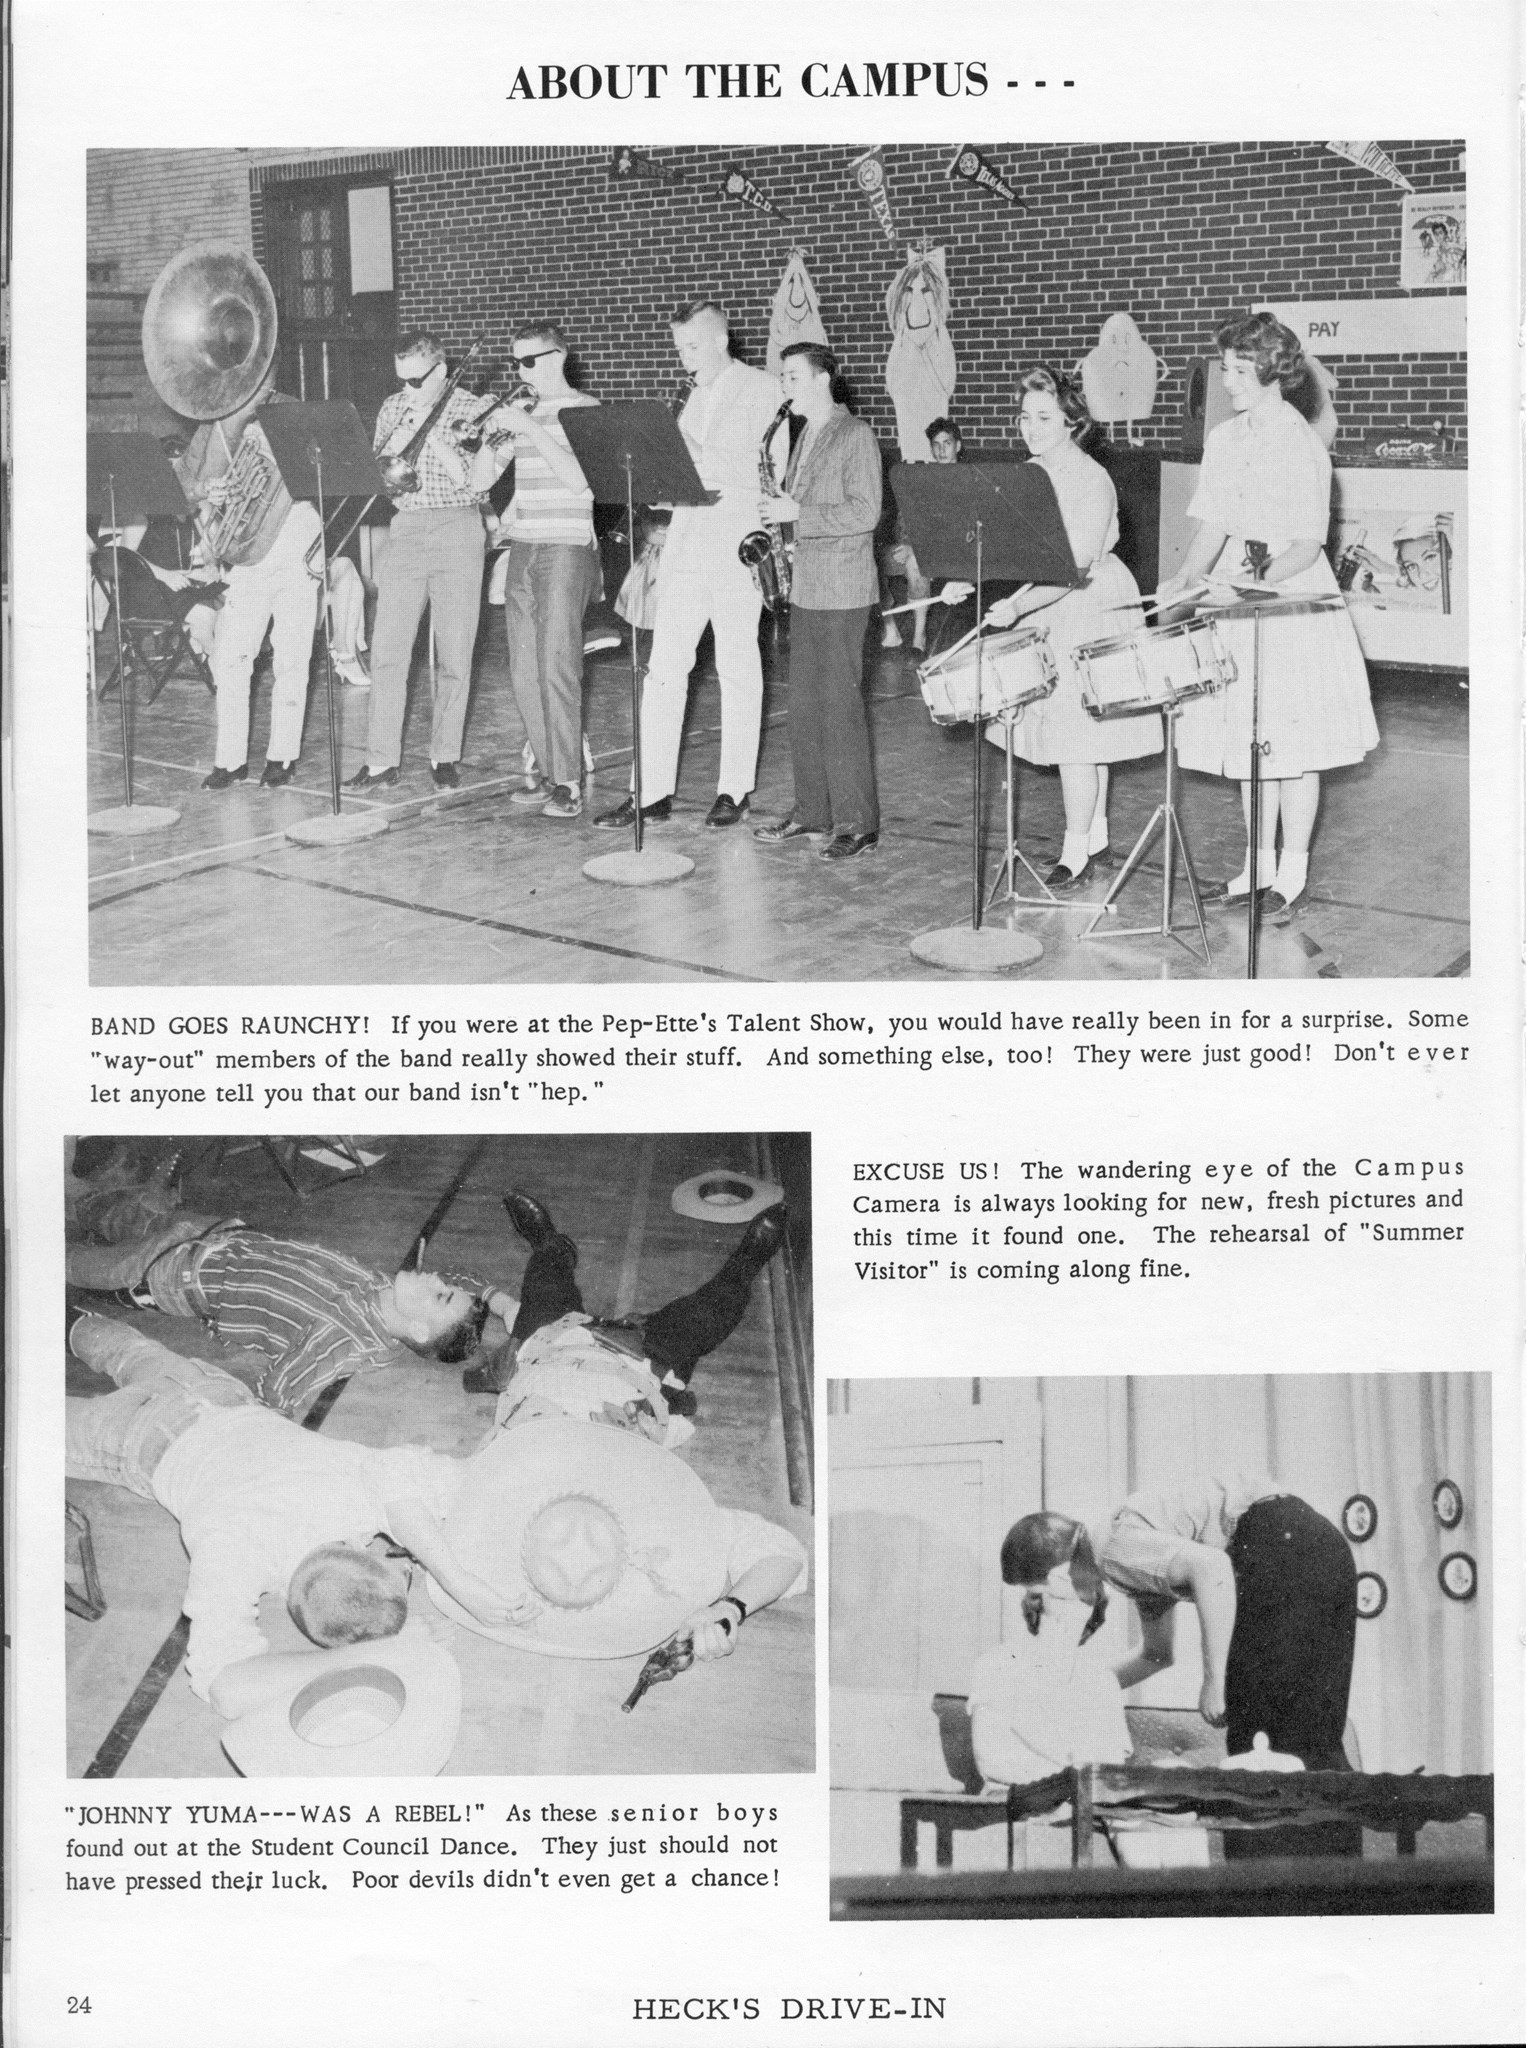 ../../../Images/Large/1961/Arclight-1961-pg0024.jpg